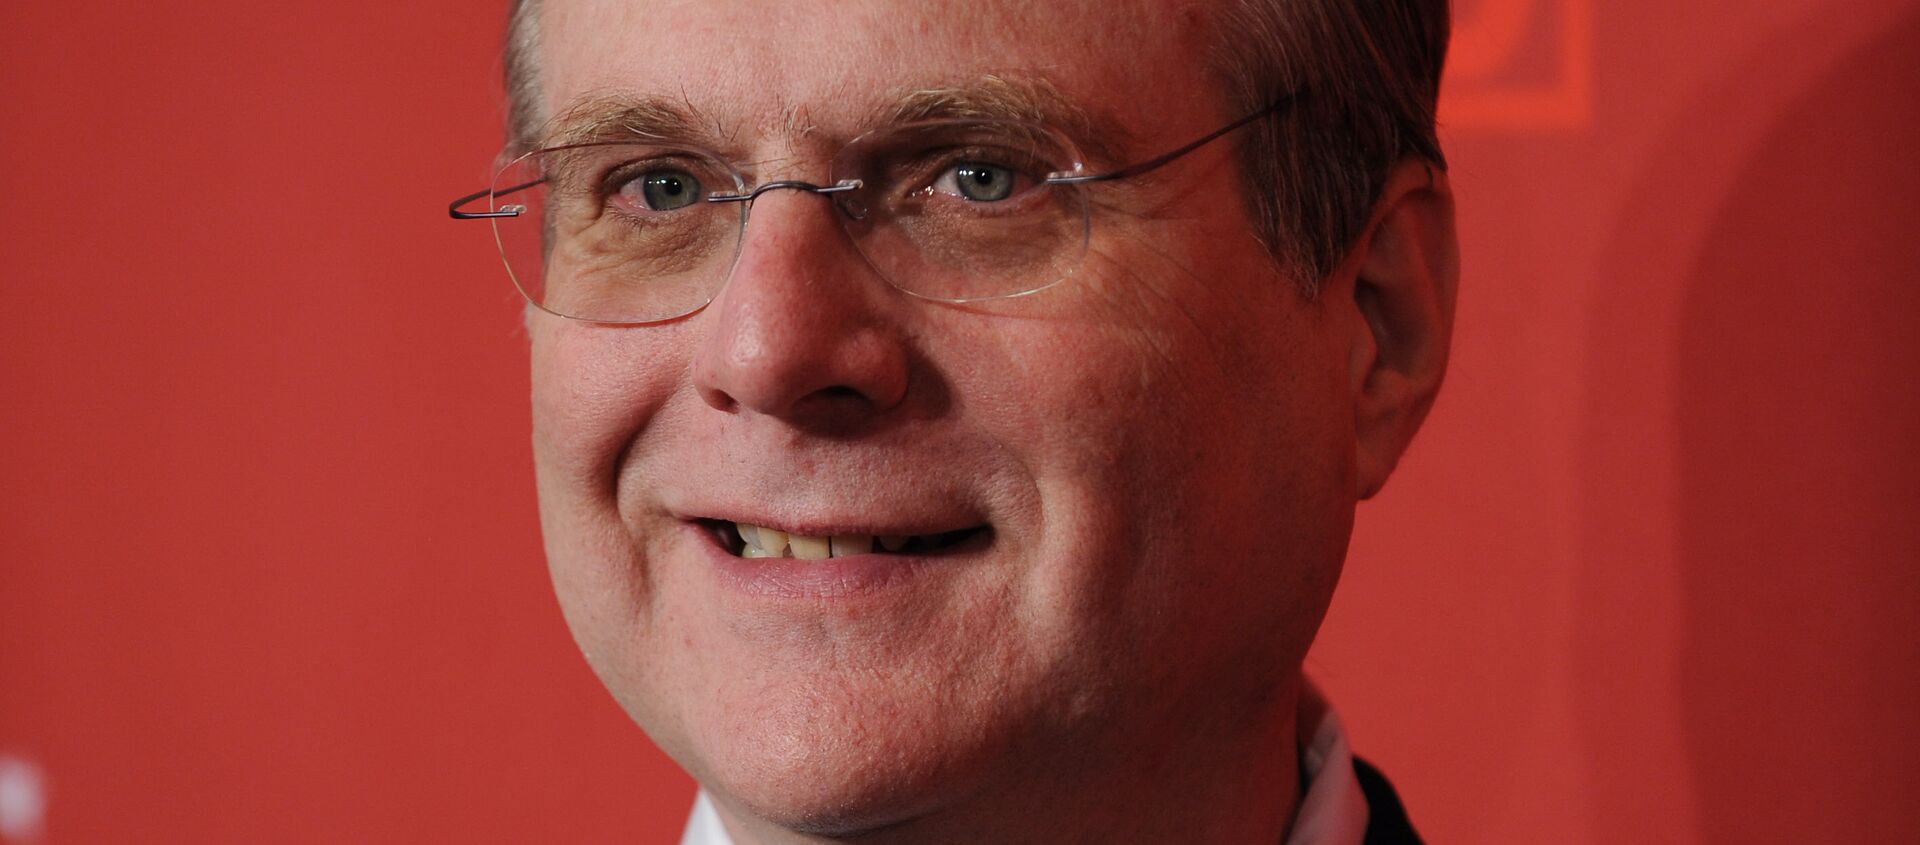 (FILES) In this file photo taken on May 8, 2008 Paul Allen, Microsoft co-founder, arrives at Time Magazine's 100 Most Influential People in the World dinner in New York. - Sputnik Türkiye, 1920, 16.10.2018